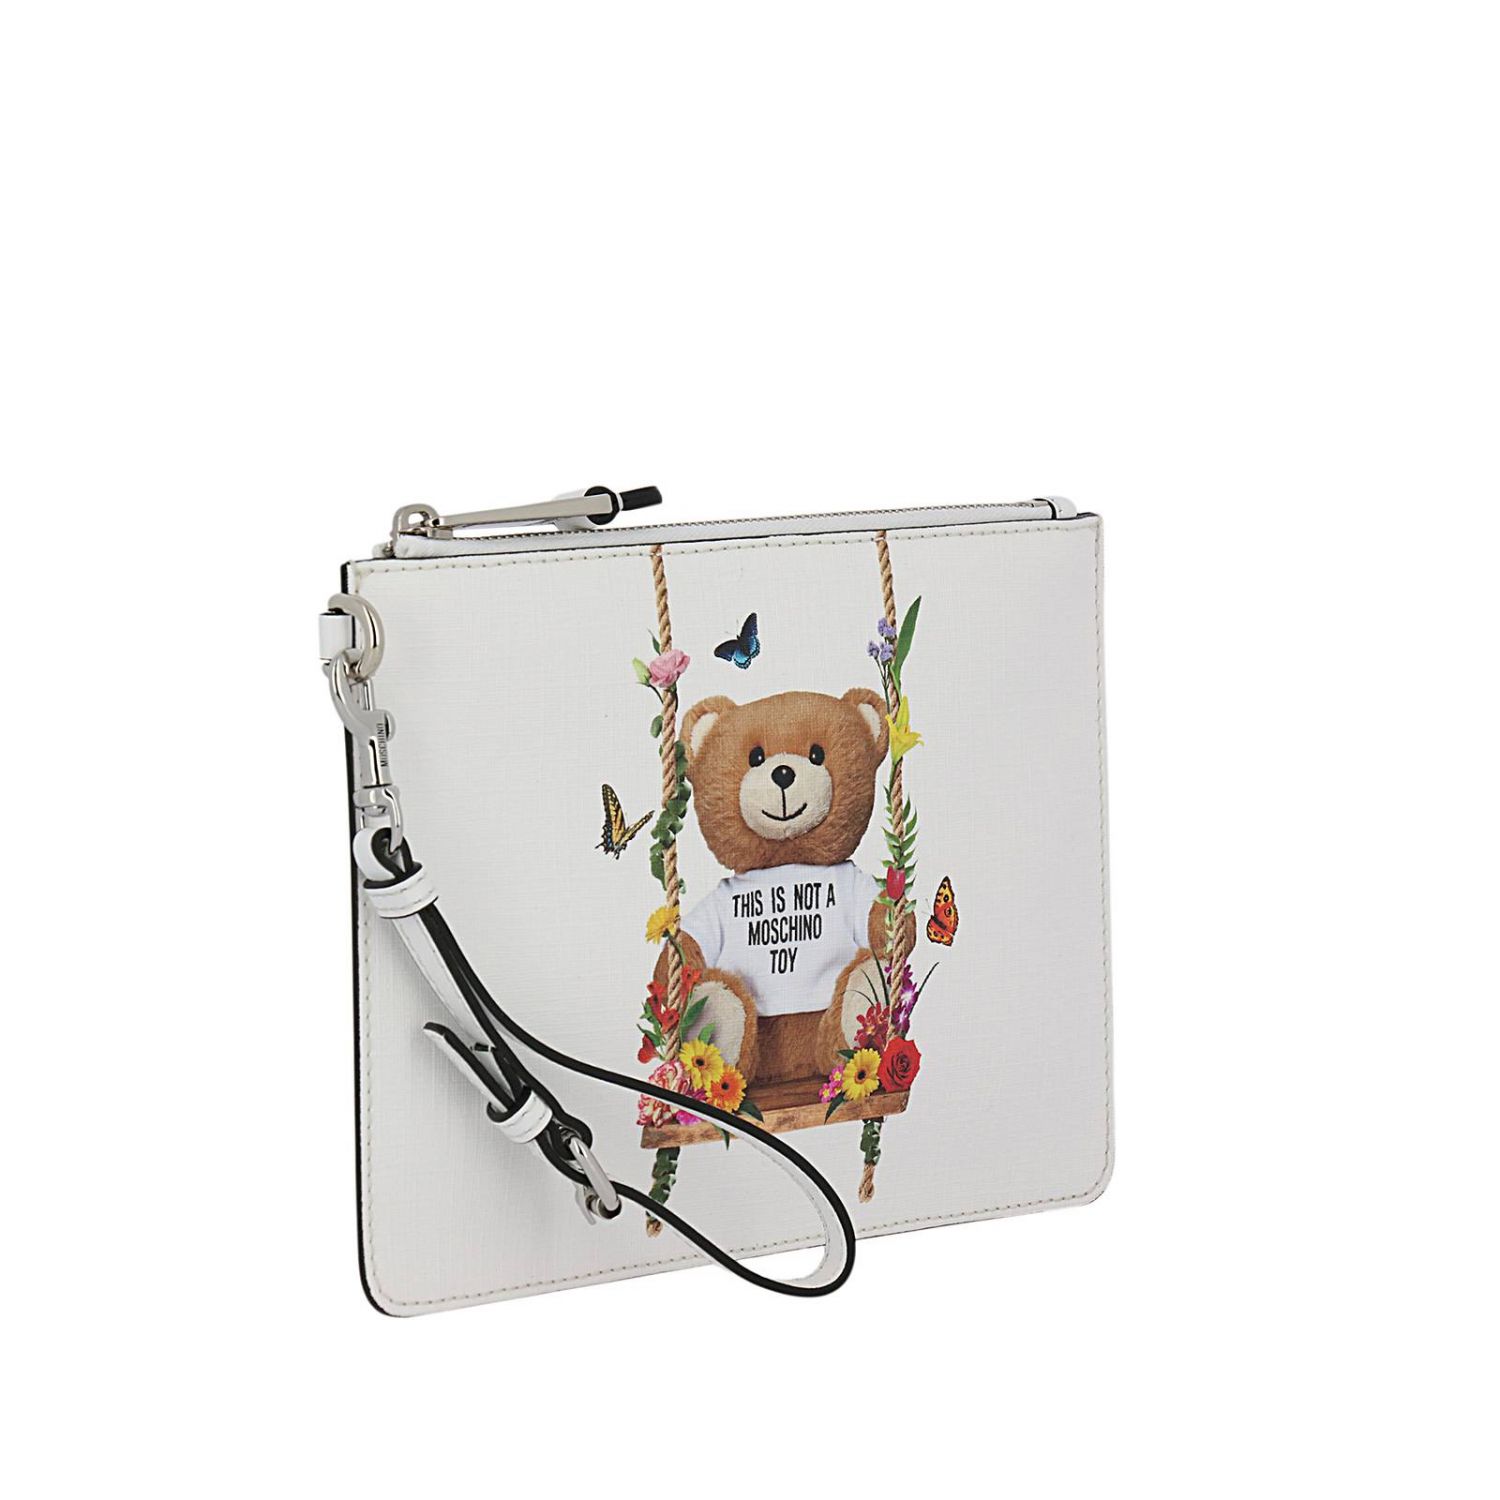 Moschino Couture Outlet: Shoulder bag women - White | Clutch Moschino ...